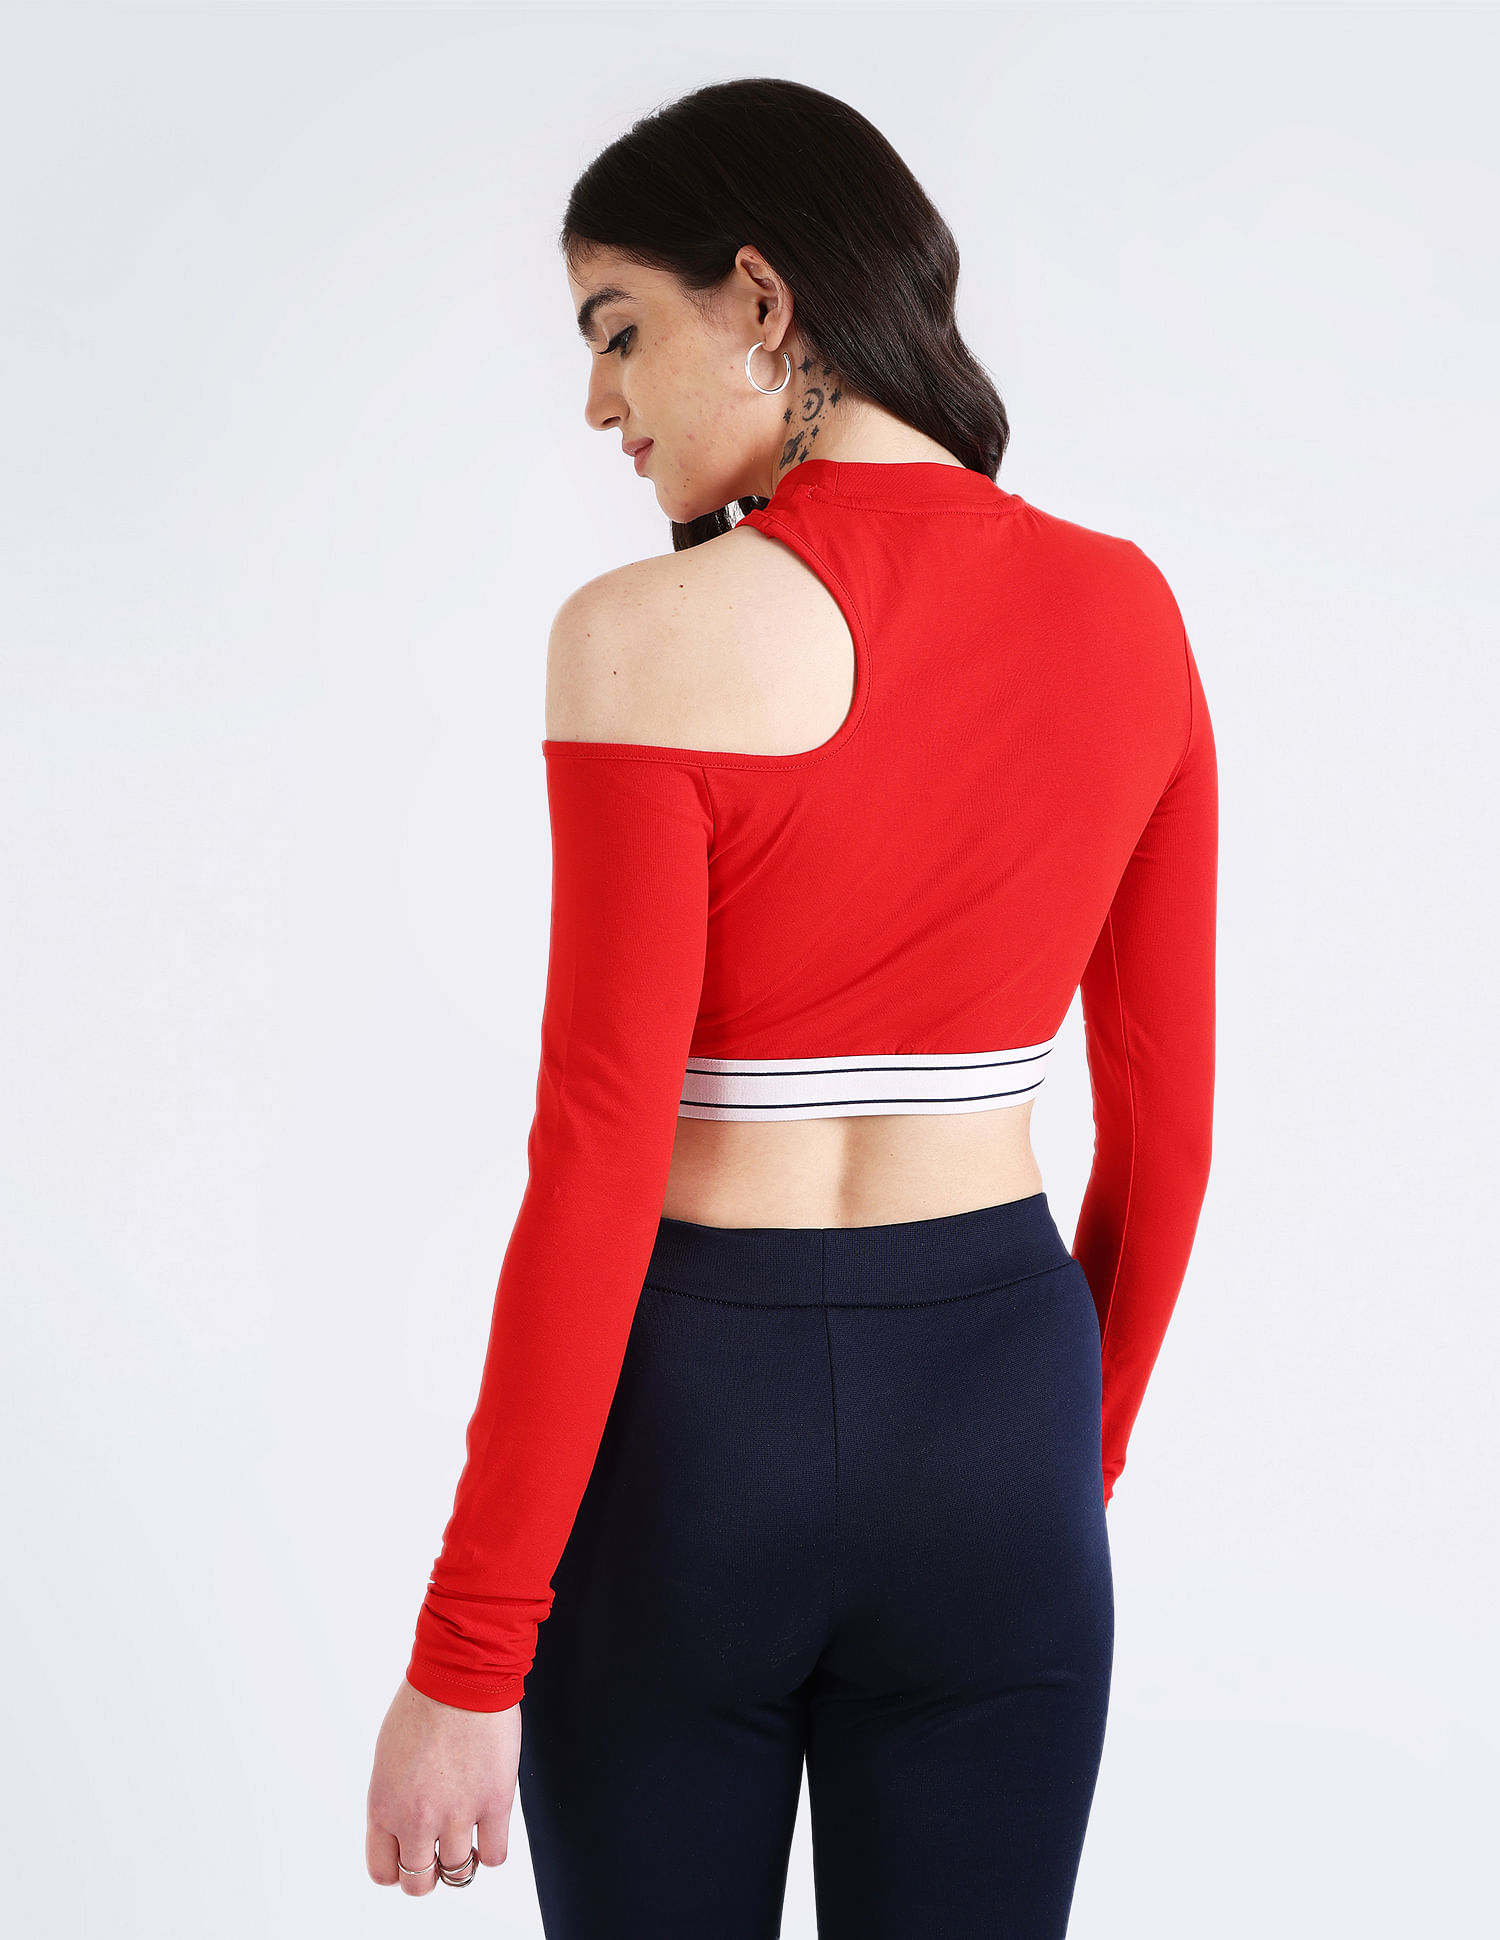 Logo Buy Tommy Out Waistband Detail Hilfiger Cut Top Crop